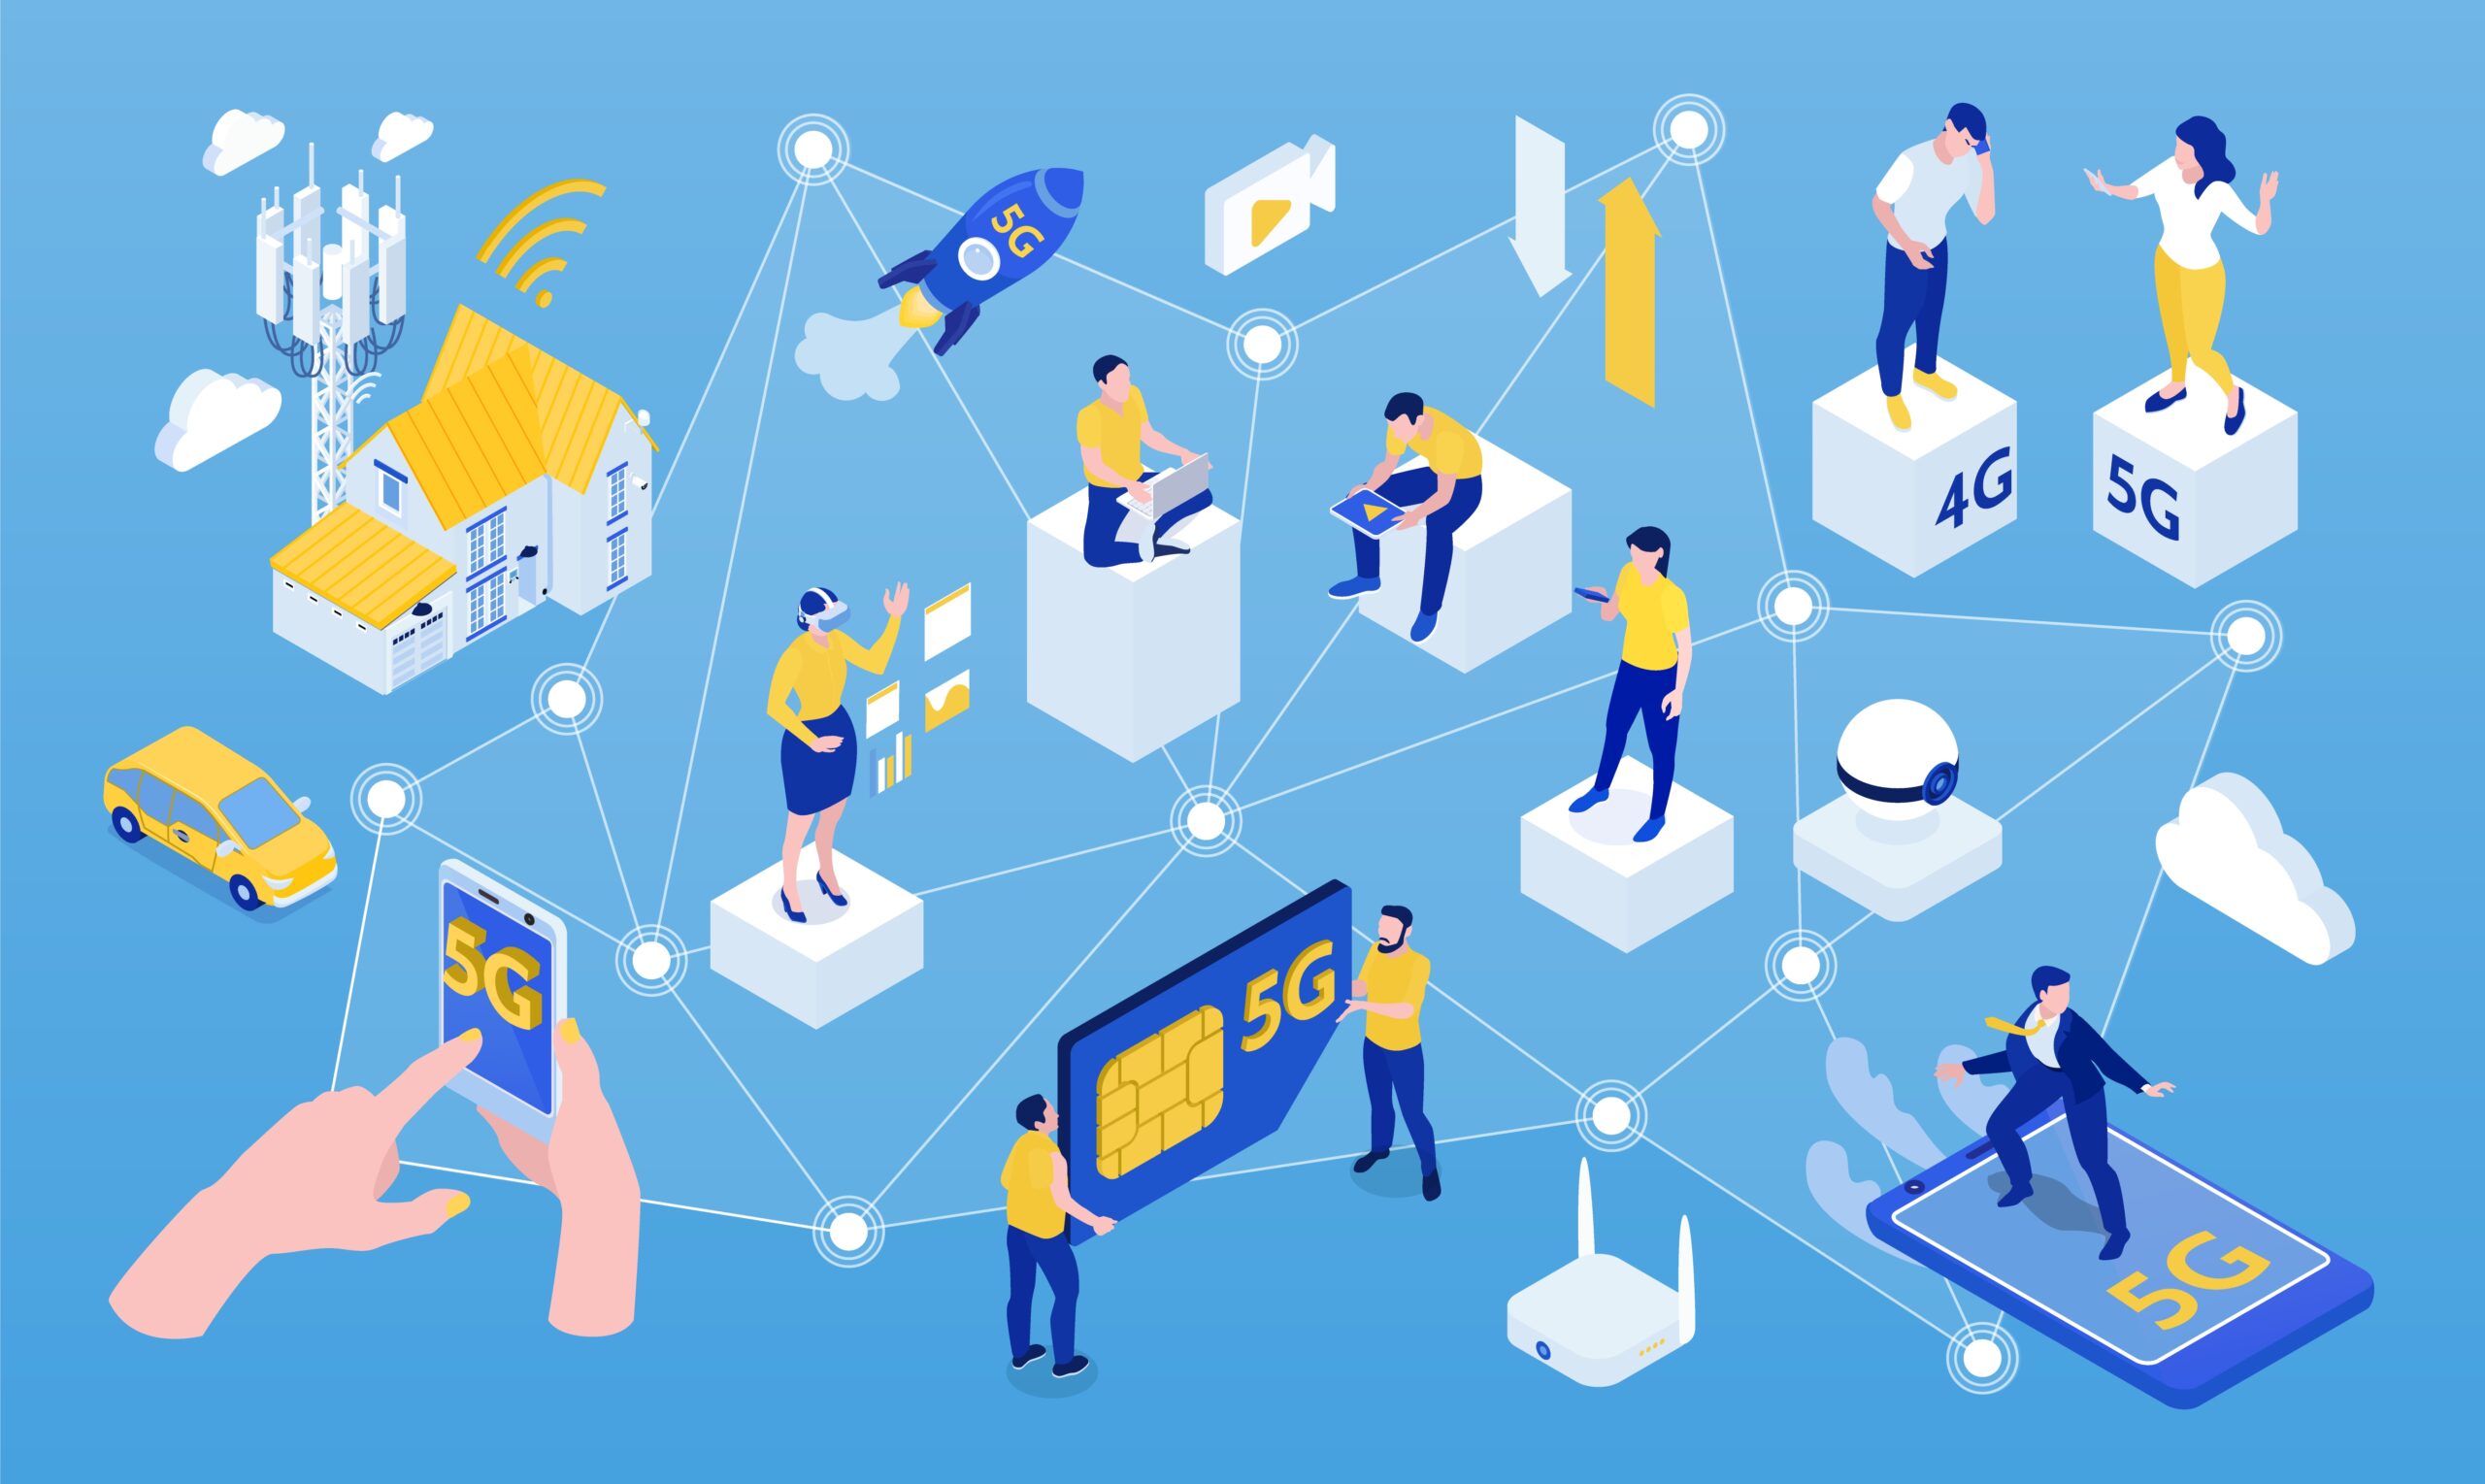 Internet 5g Isometric Composition